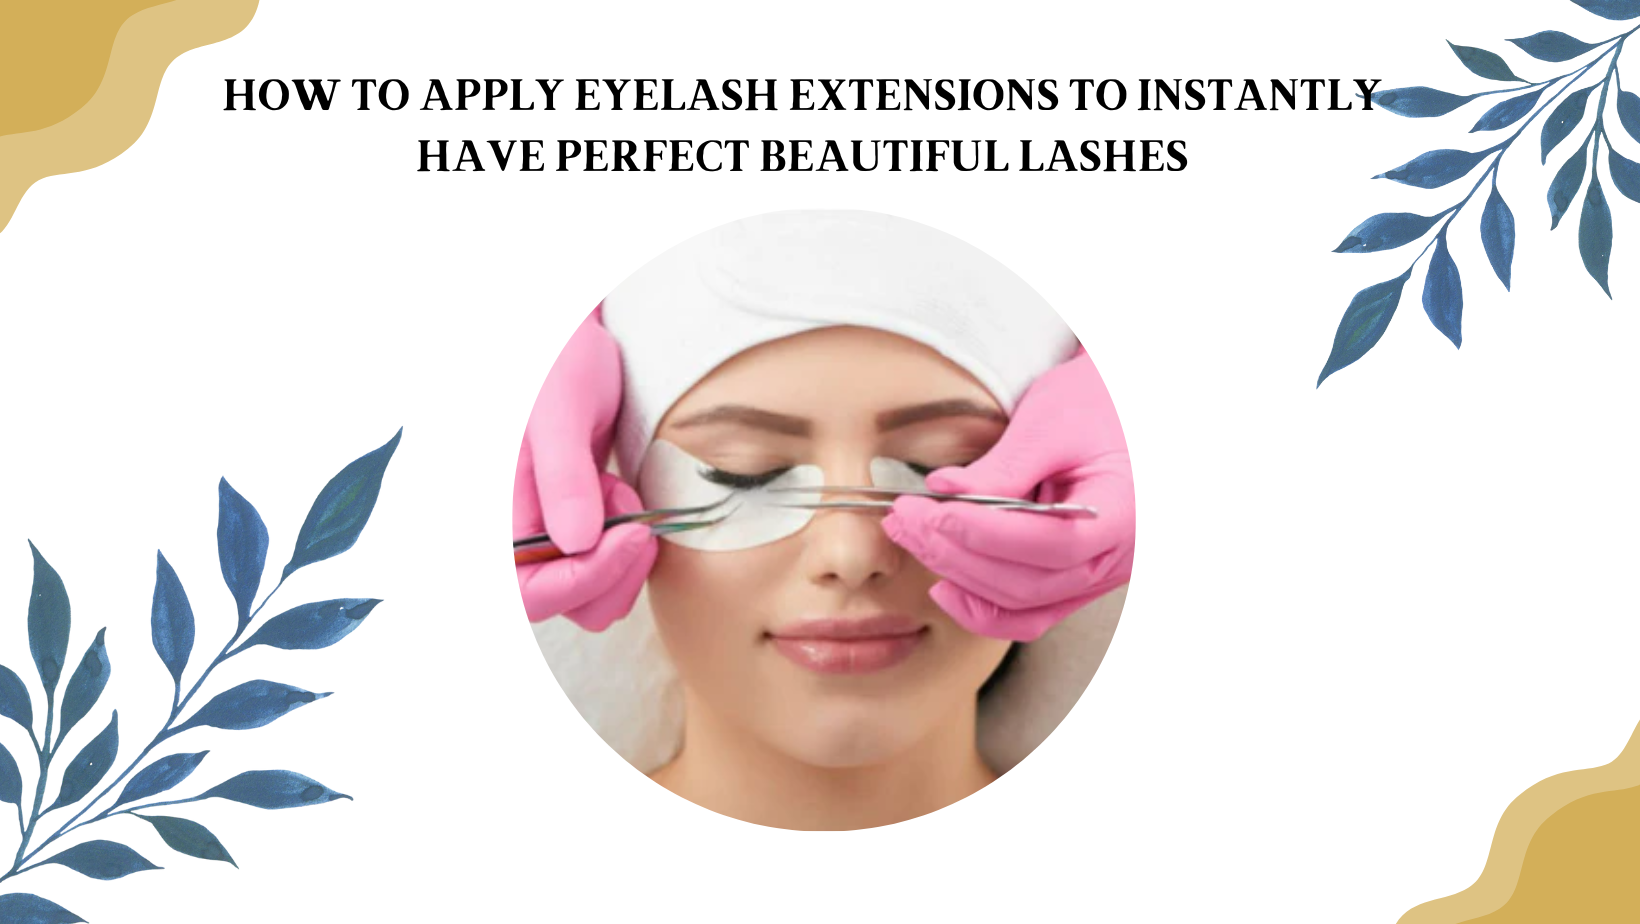 How to apply eyelash extensions to instantly have perfect beautiful lashes